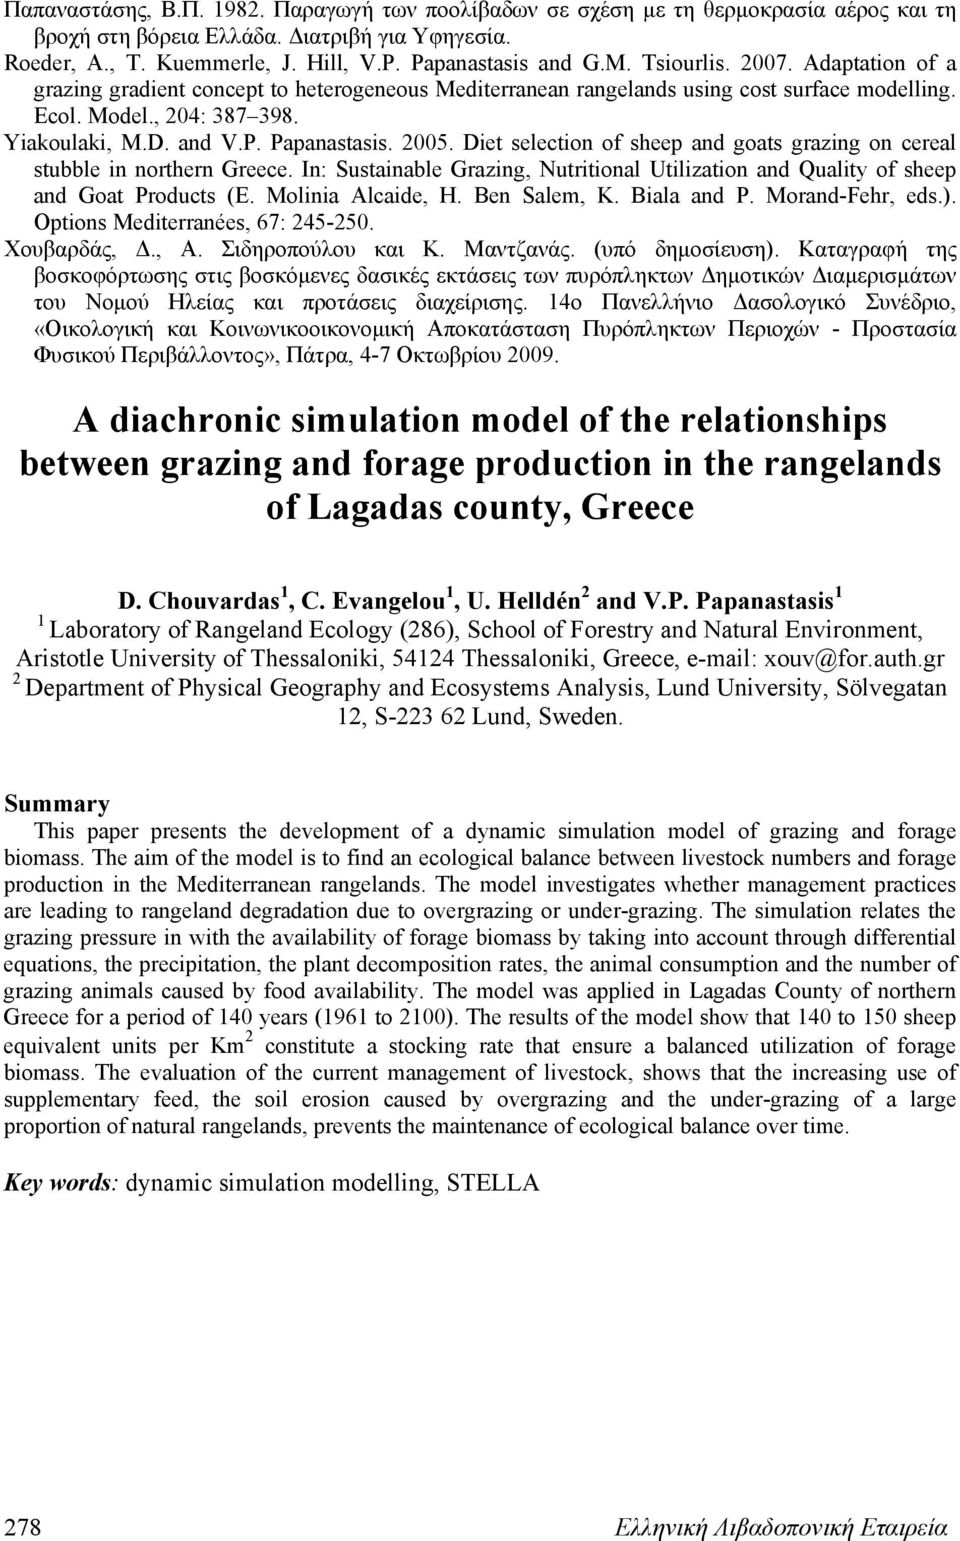 2005. Diet selection of sheep and goats grazing on cereal stubble in northern Greece. In: Sustainable Grazing, Nutritional Utilization and Quality of sheep and Goat Products (E. Molinia Alcaide, H.